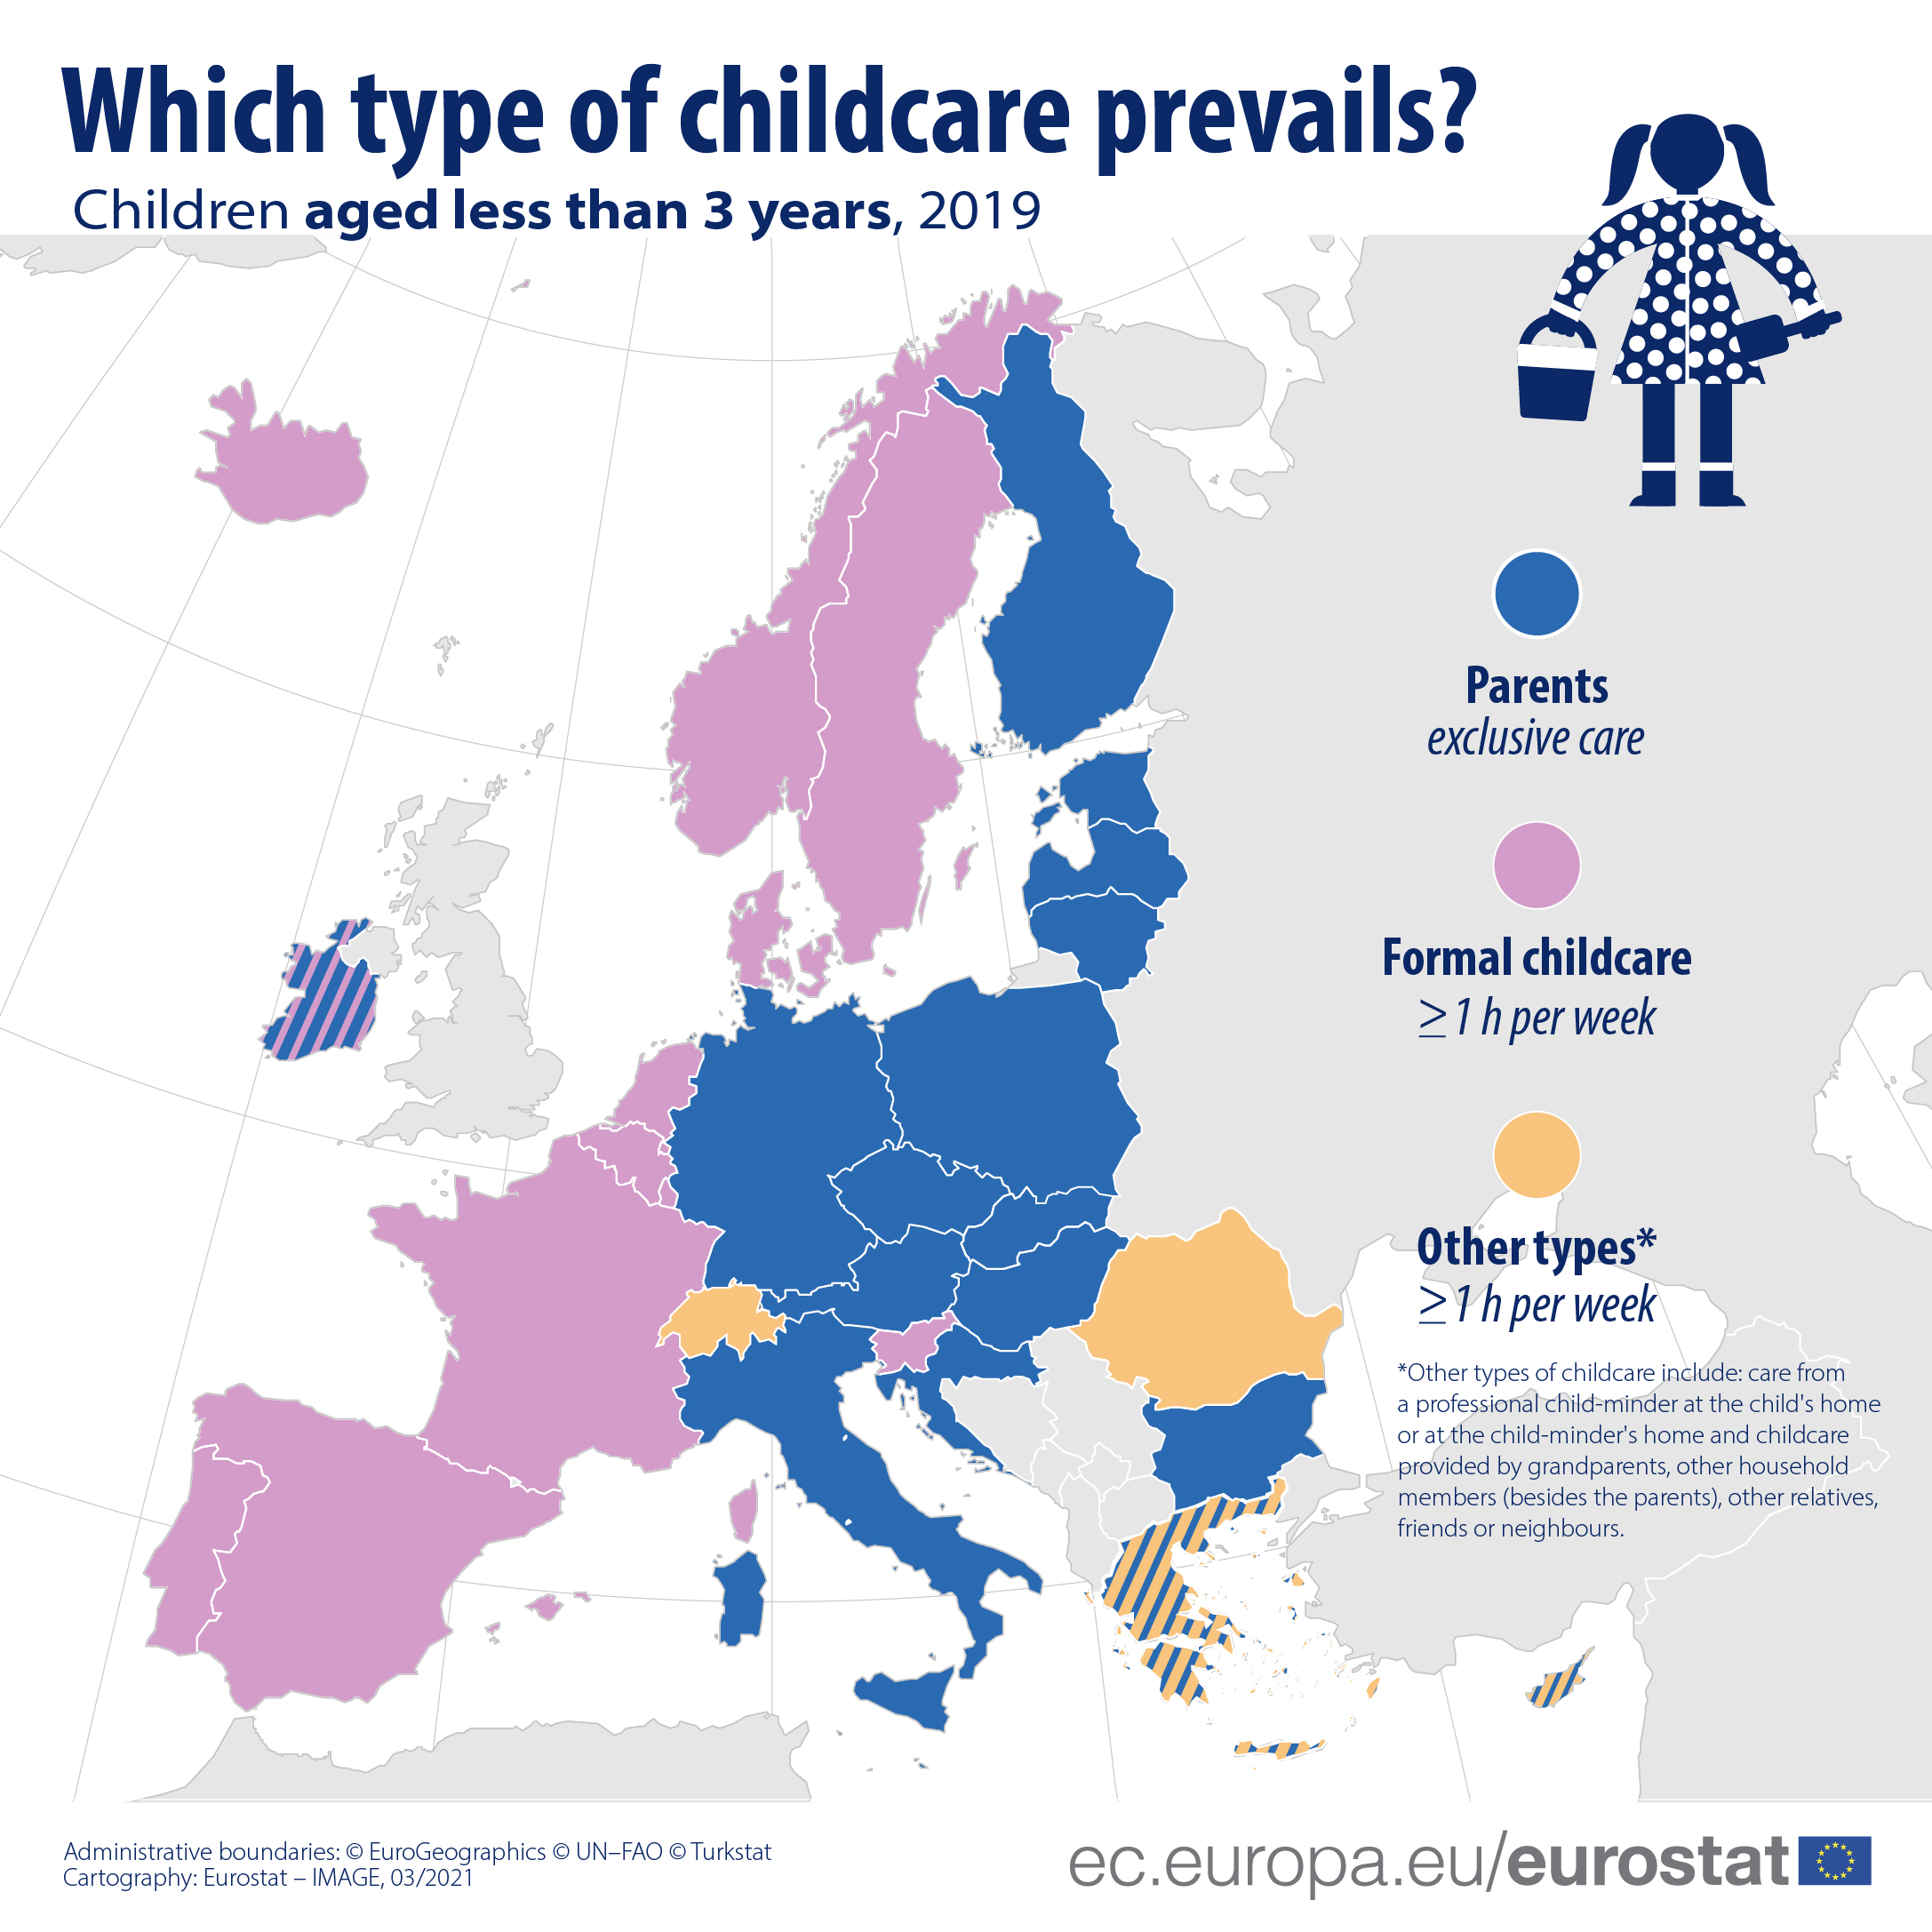 Map of Europe showing which type of childcare prevails in each EU and EFTA country, 2019 data for children under 3 years of age